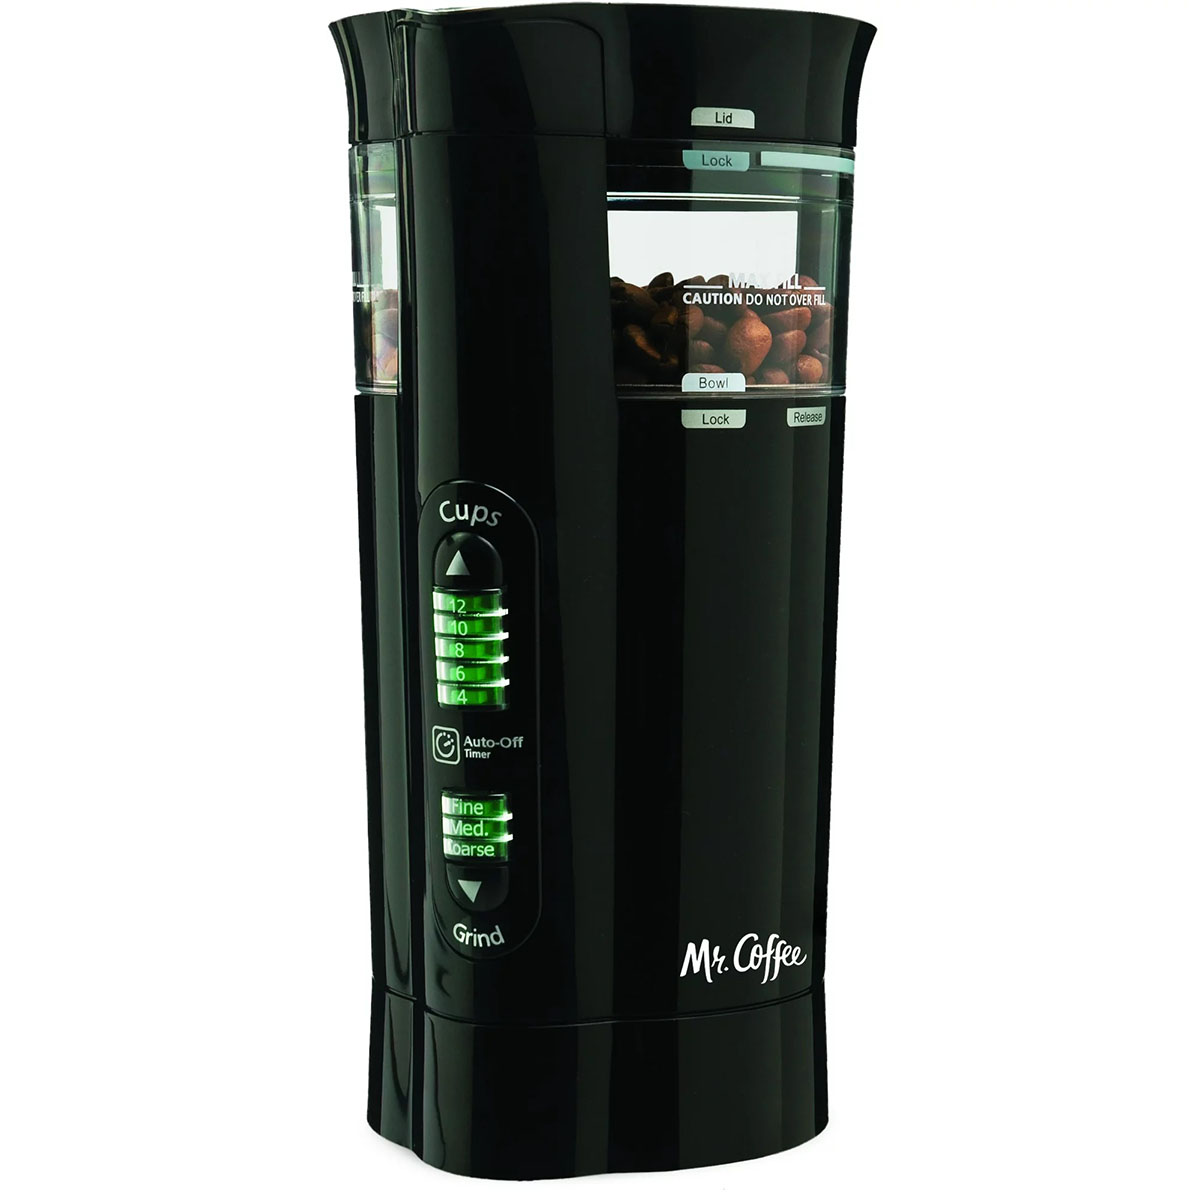 Mr. Coffee(R) 12 Cup Electric Programmable Coffee Grinder